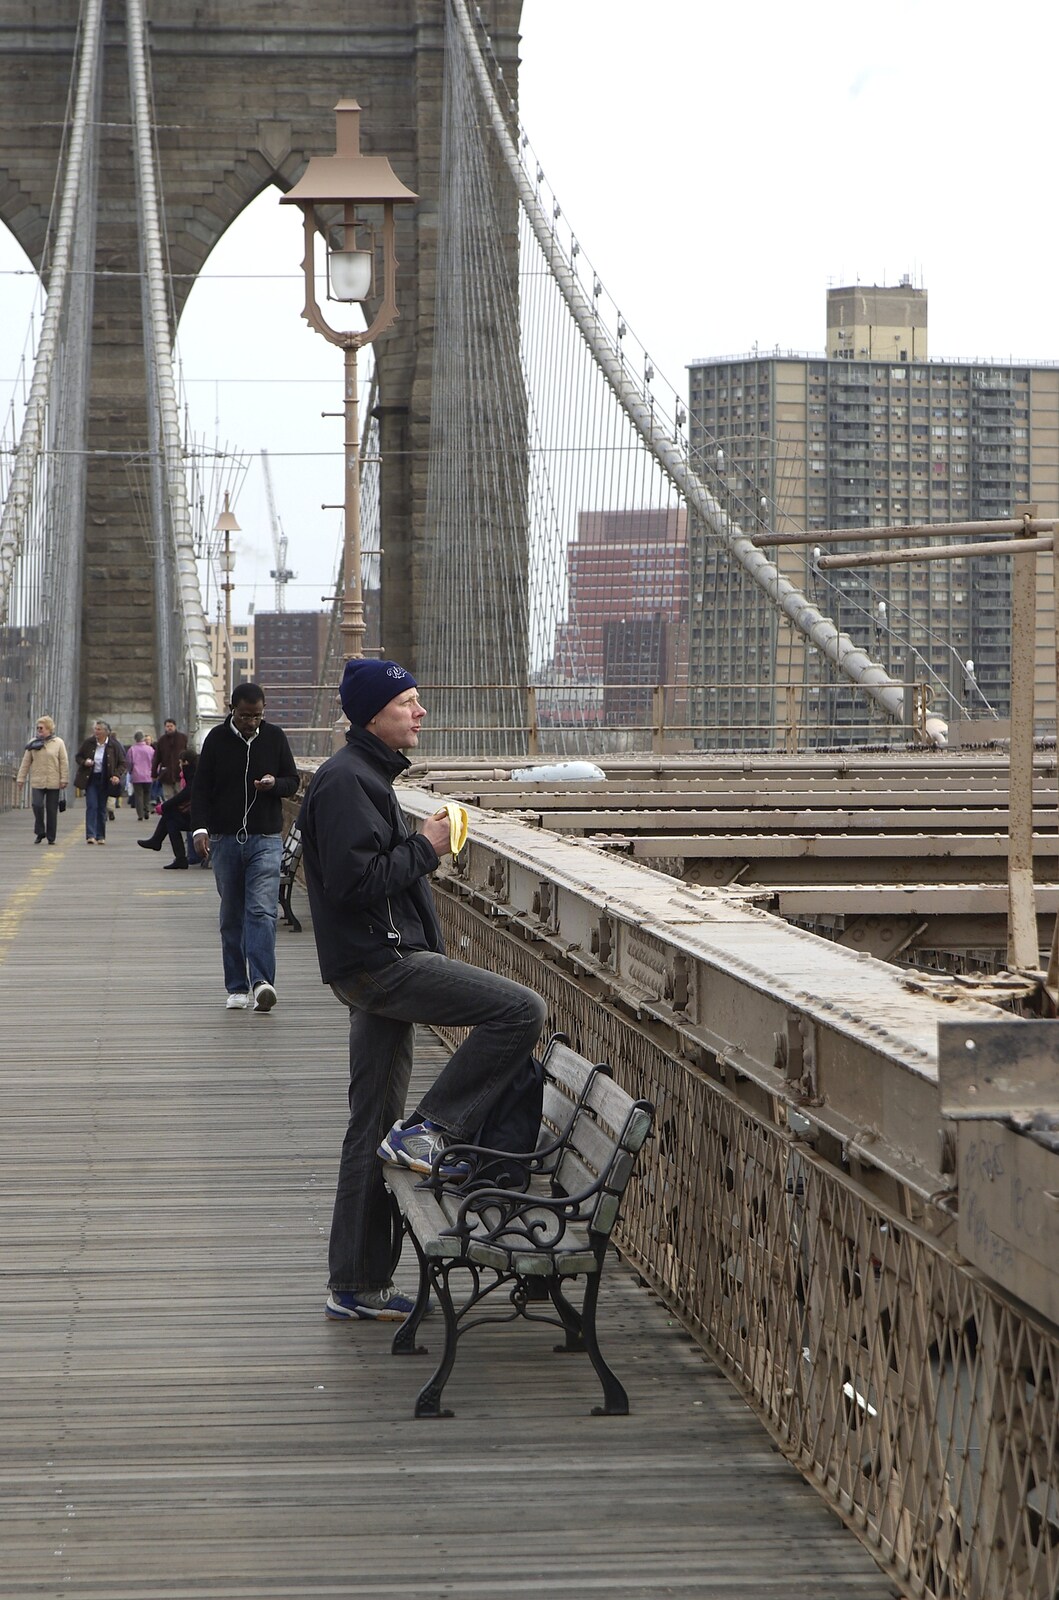 Crossing Brooklyn Bridge, New York, US - 26th March 2007: Some dude looks out over the city